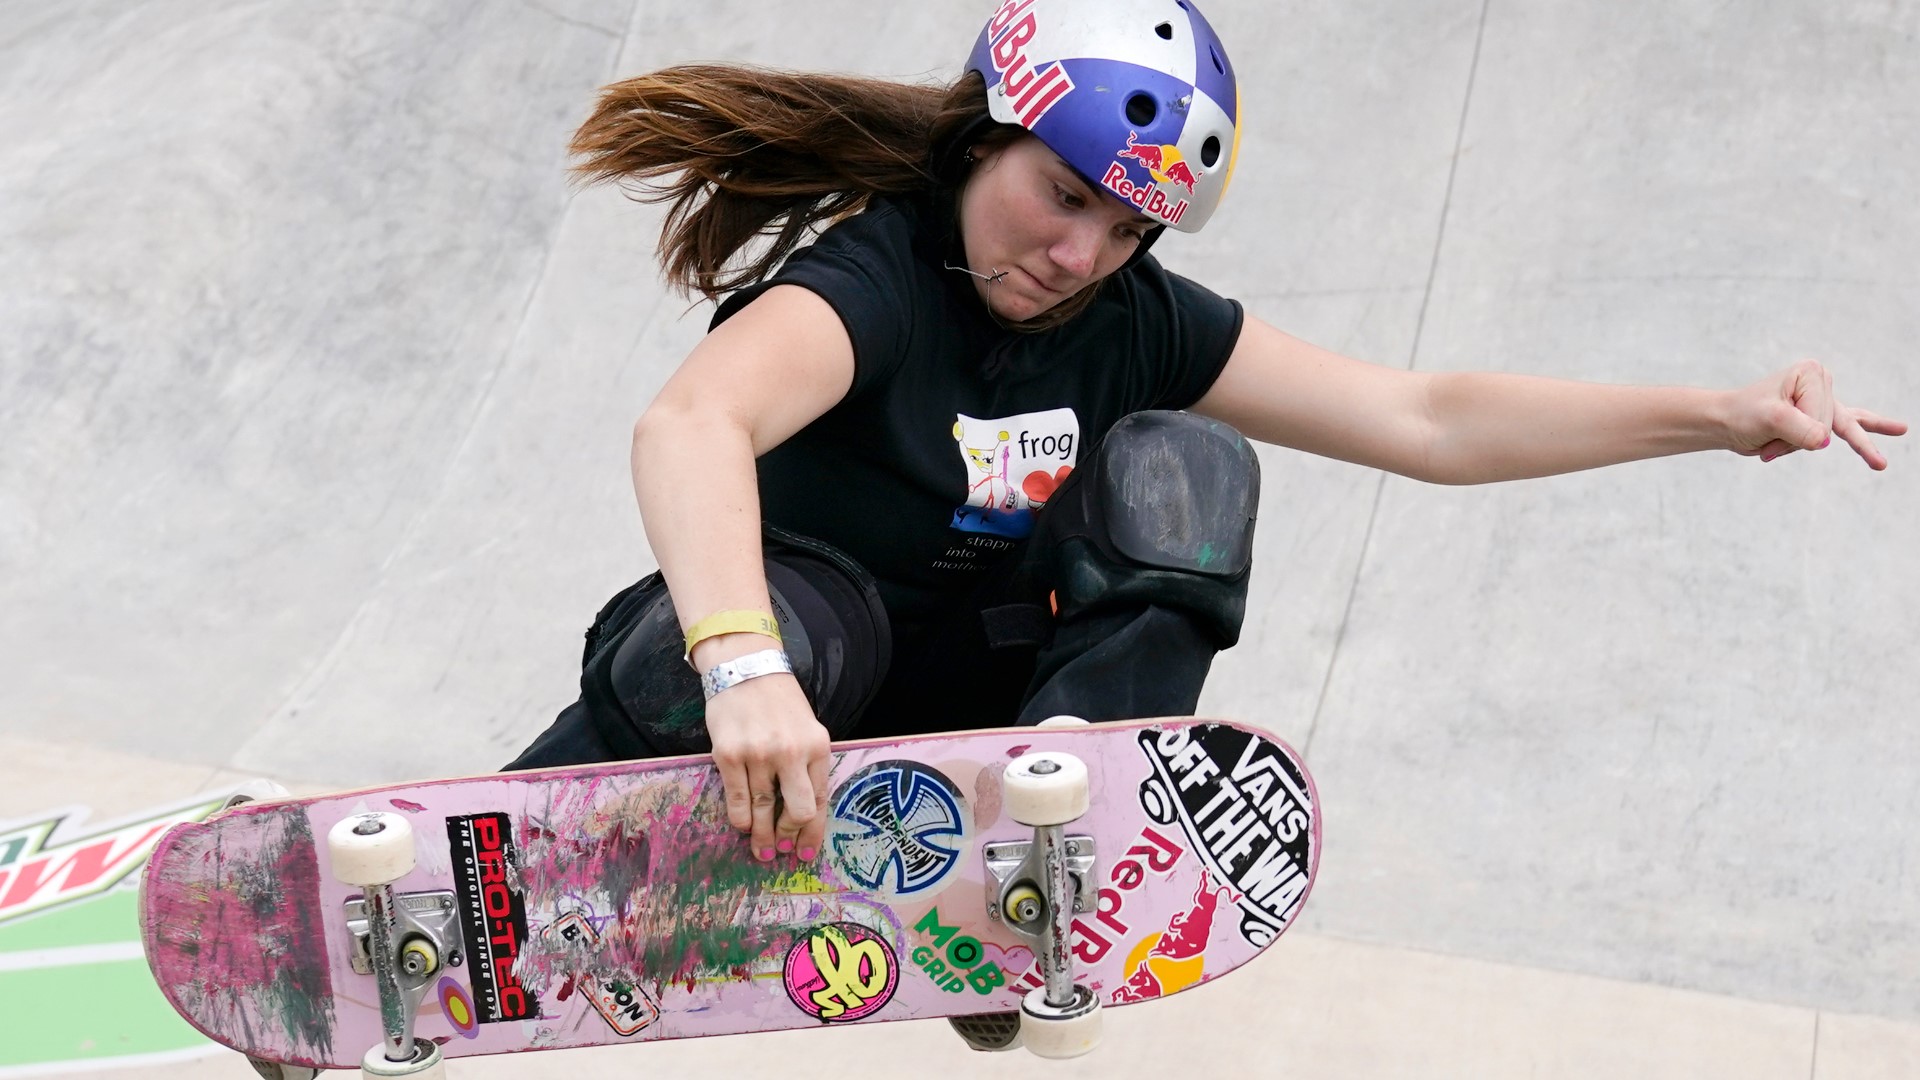 Brighton  Zeuner is no stranger to skateboarding royalty, and she is hoping she can join their ranks at the Tokyo Olympics.